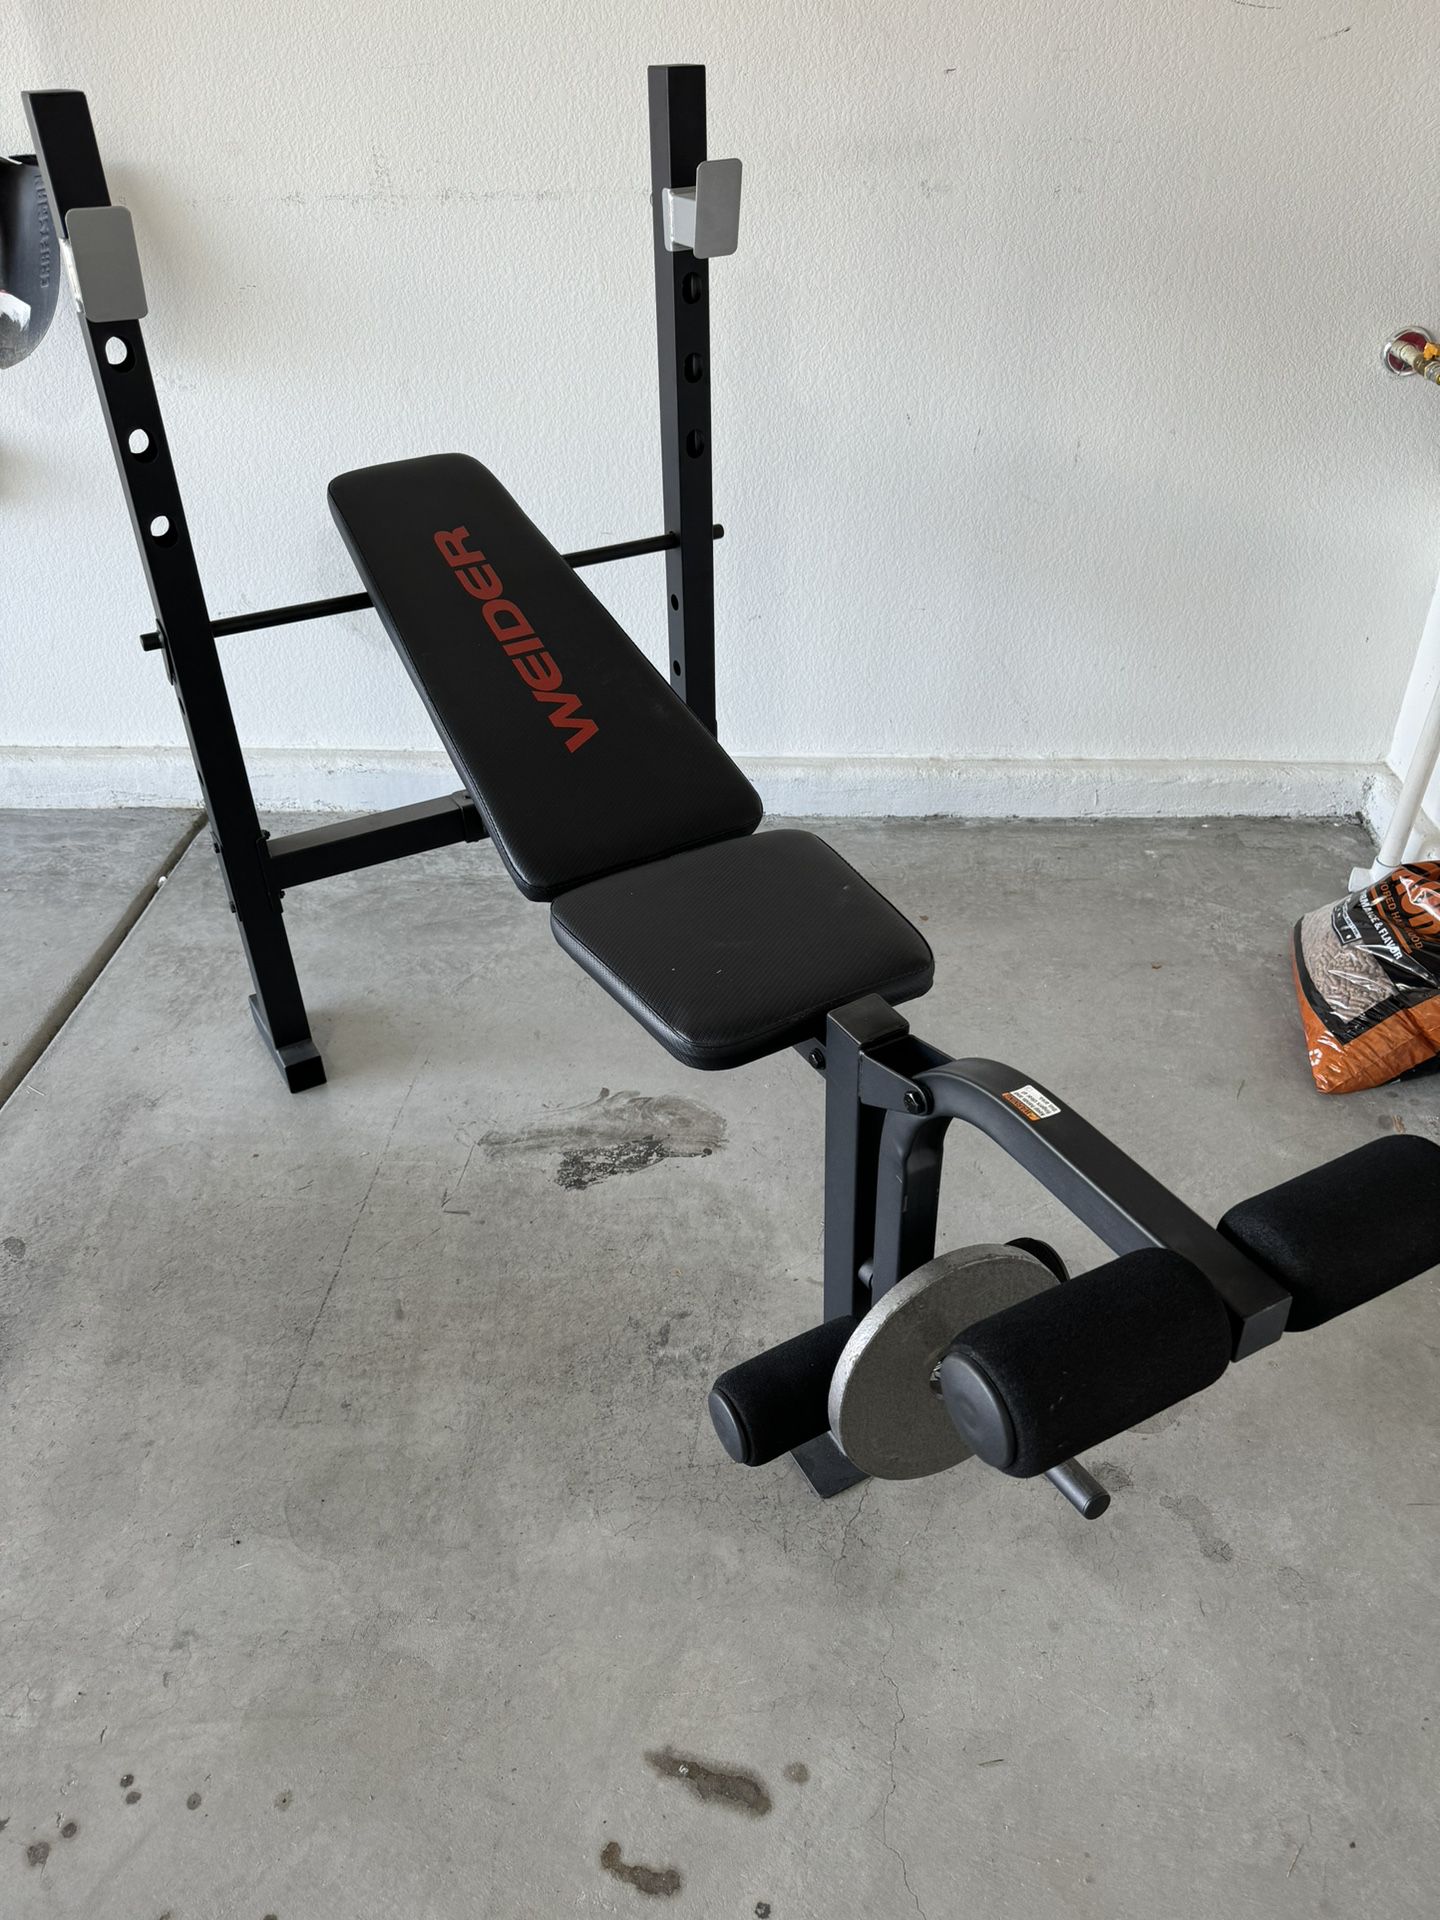 Adjustable Weight Bench And Gym Equipment (Brand new)